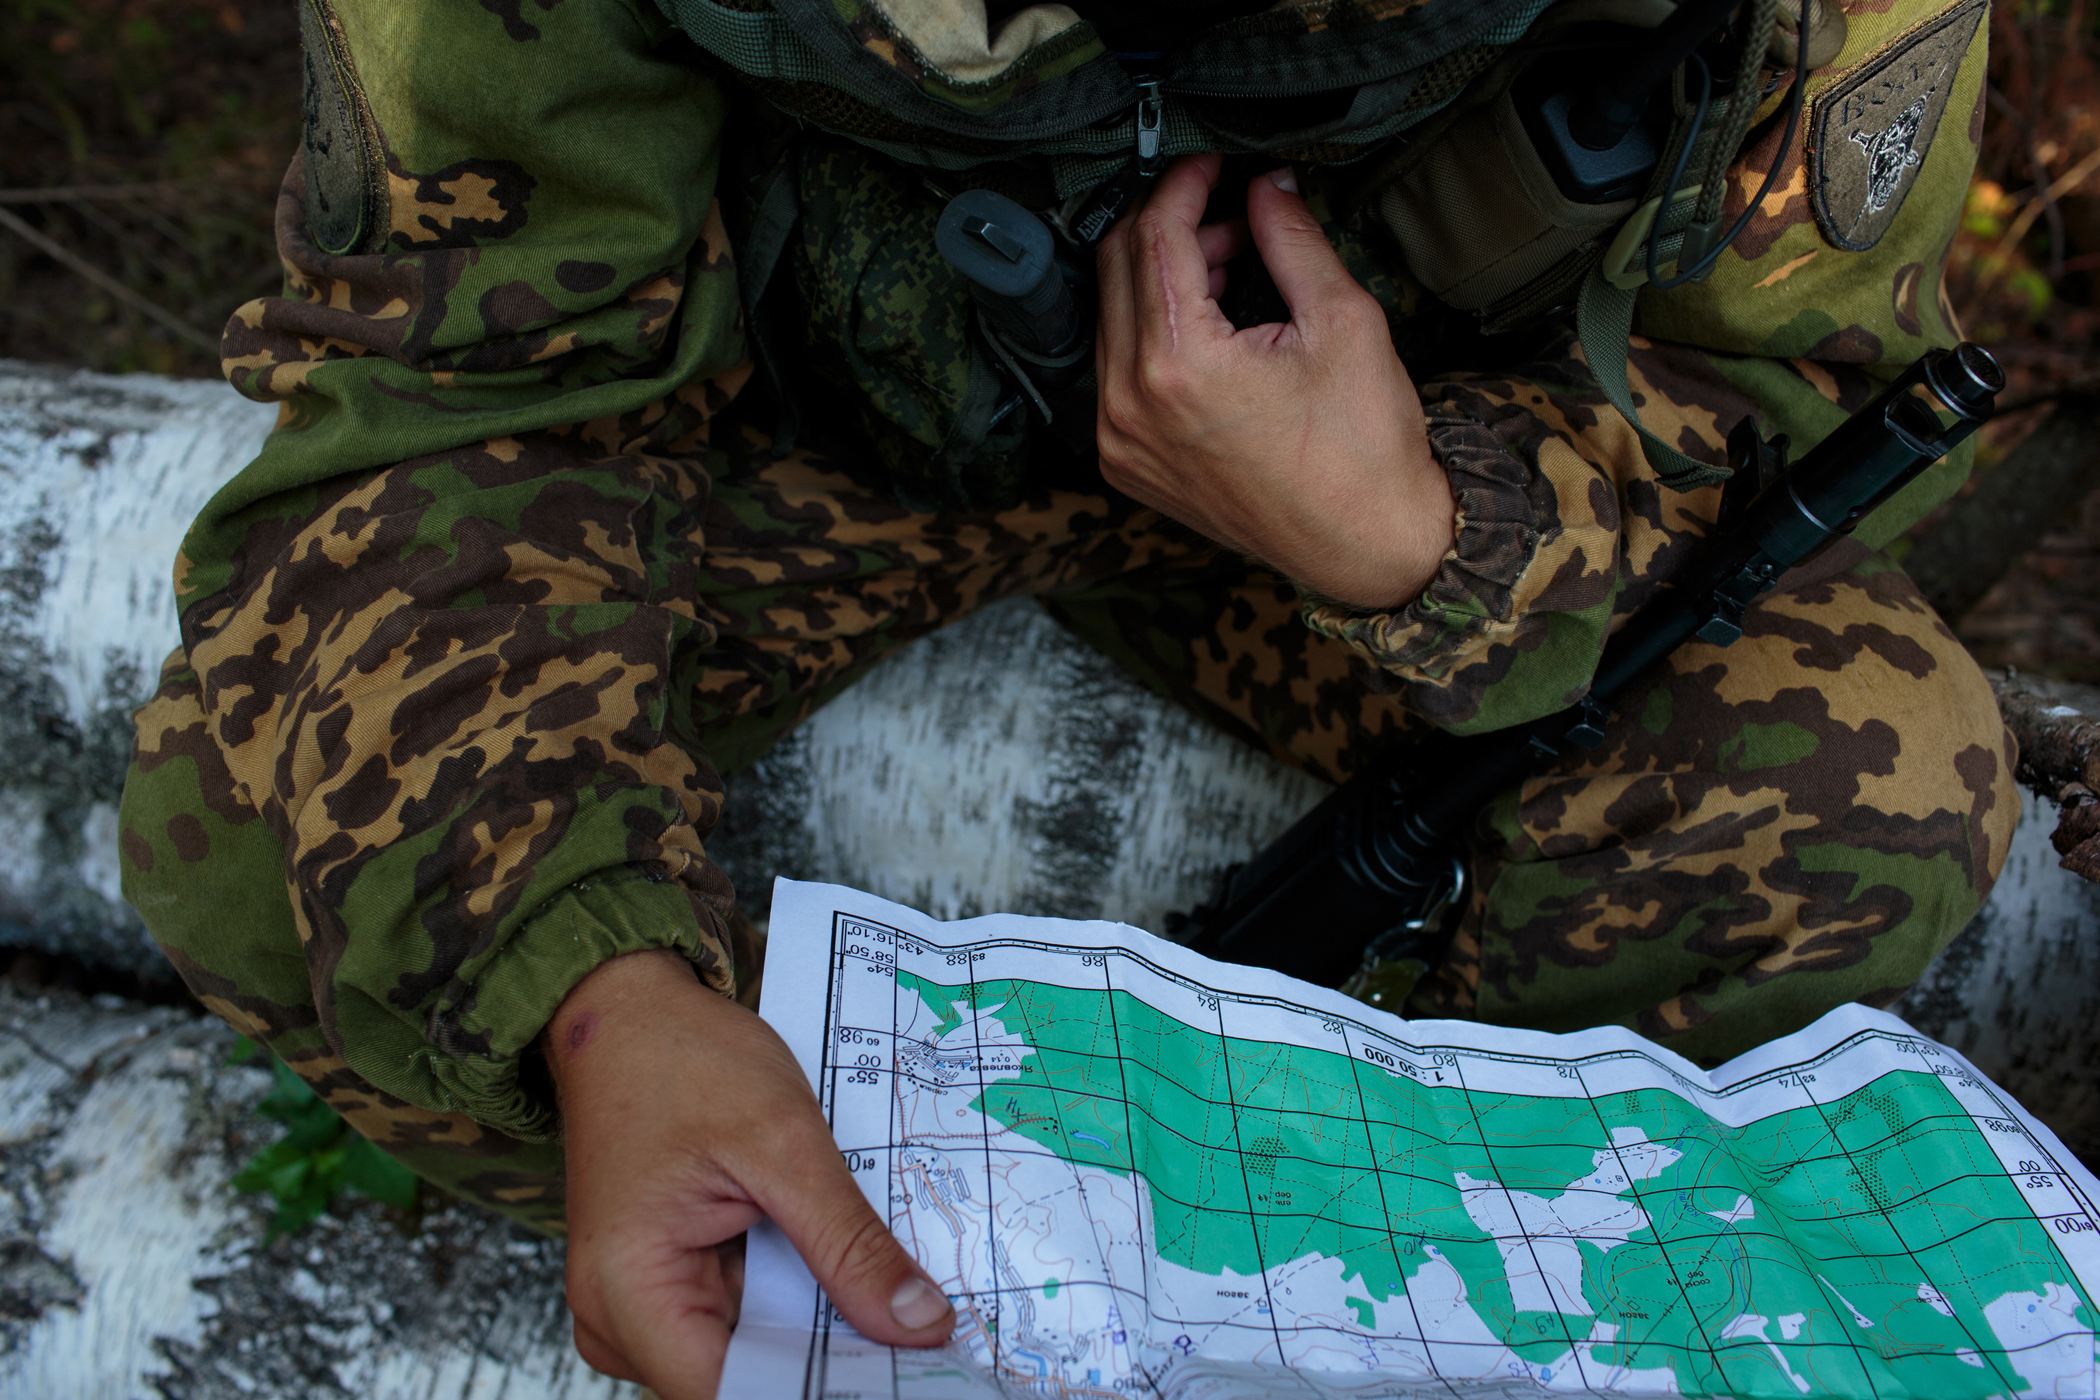 Evgeni (Jenya) Riabyxin, age 22, from Stavropol studies a map during a twelve-hour drill in the forests surrounding Diveevo, Russia.